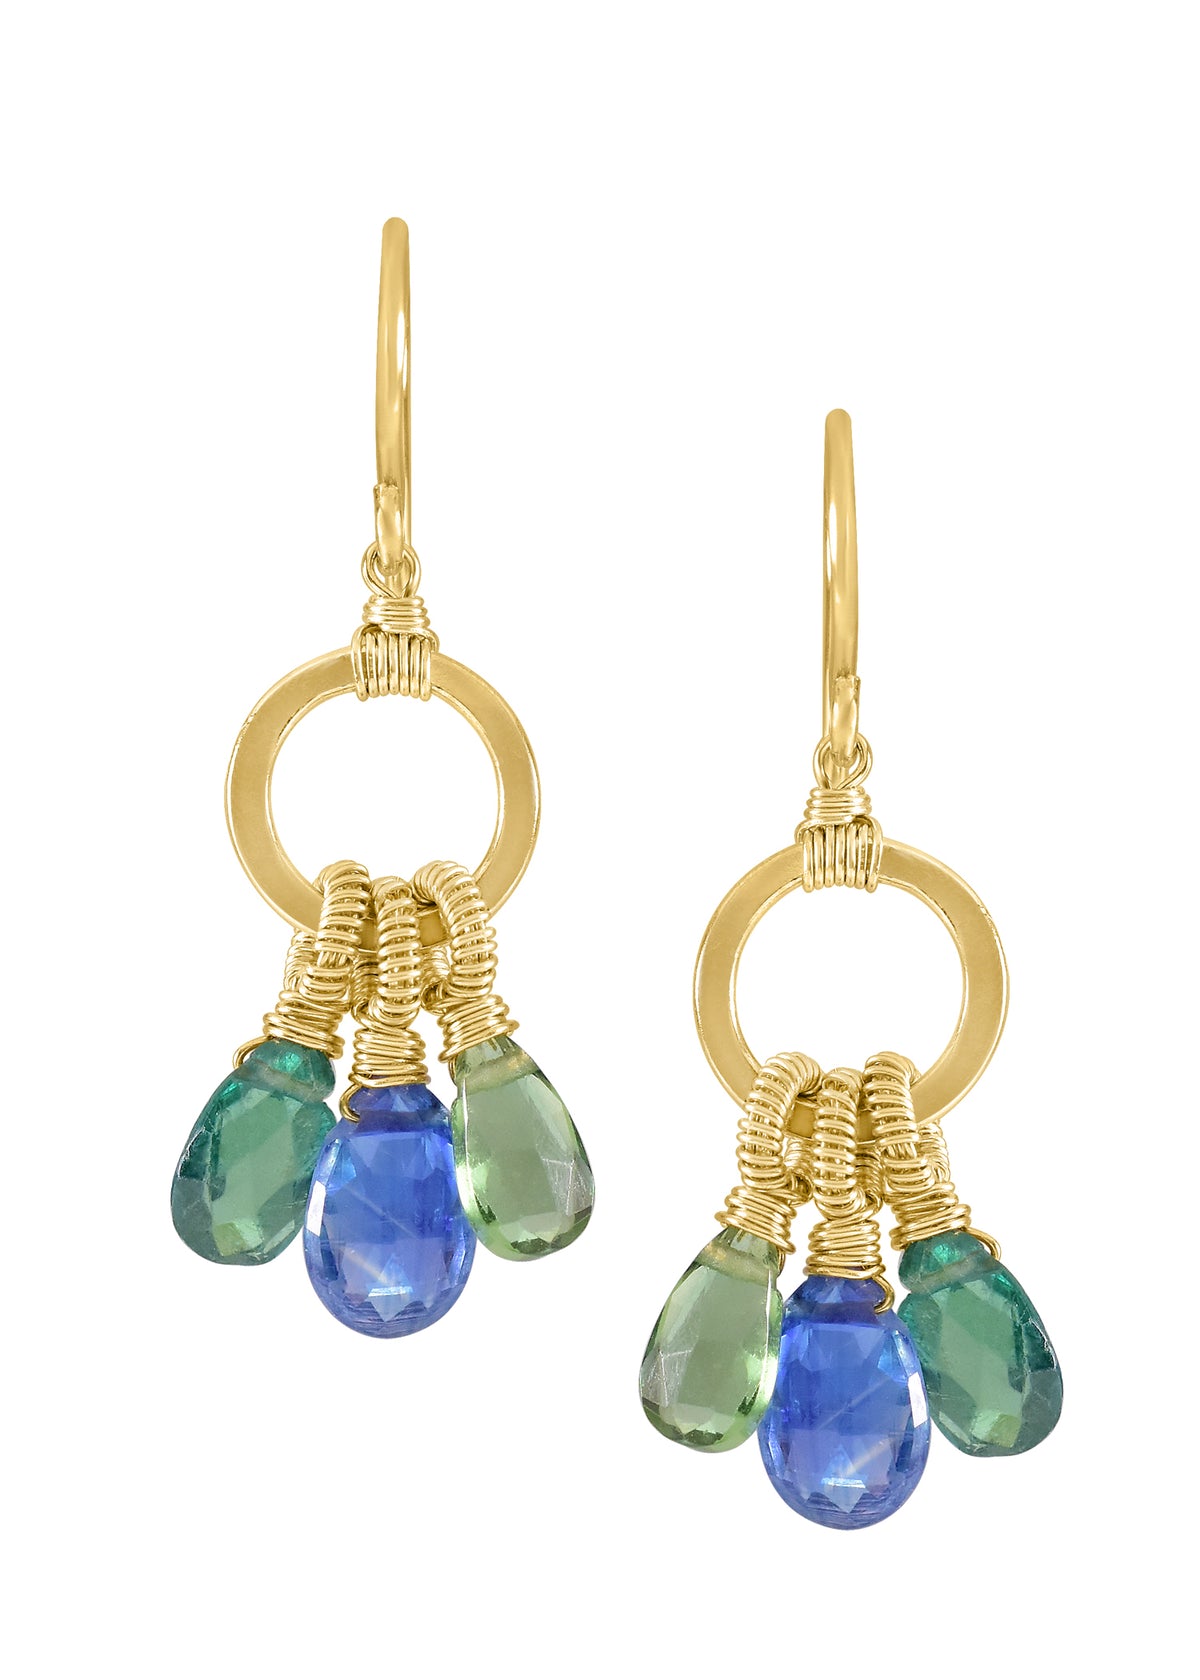 Kyanite Apatite 14k gold fill Earrings measure 1-1/8&quot; in length (including the ear wires) and 5/8&quot; in width at the widest point Handmade in our Los Angeles studio